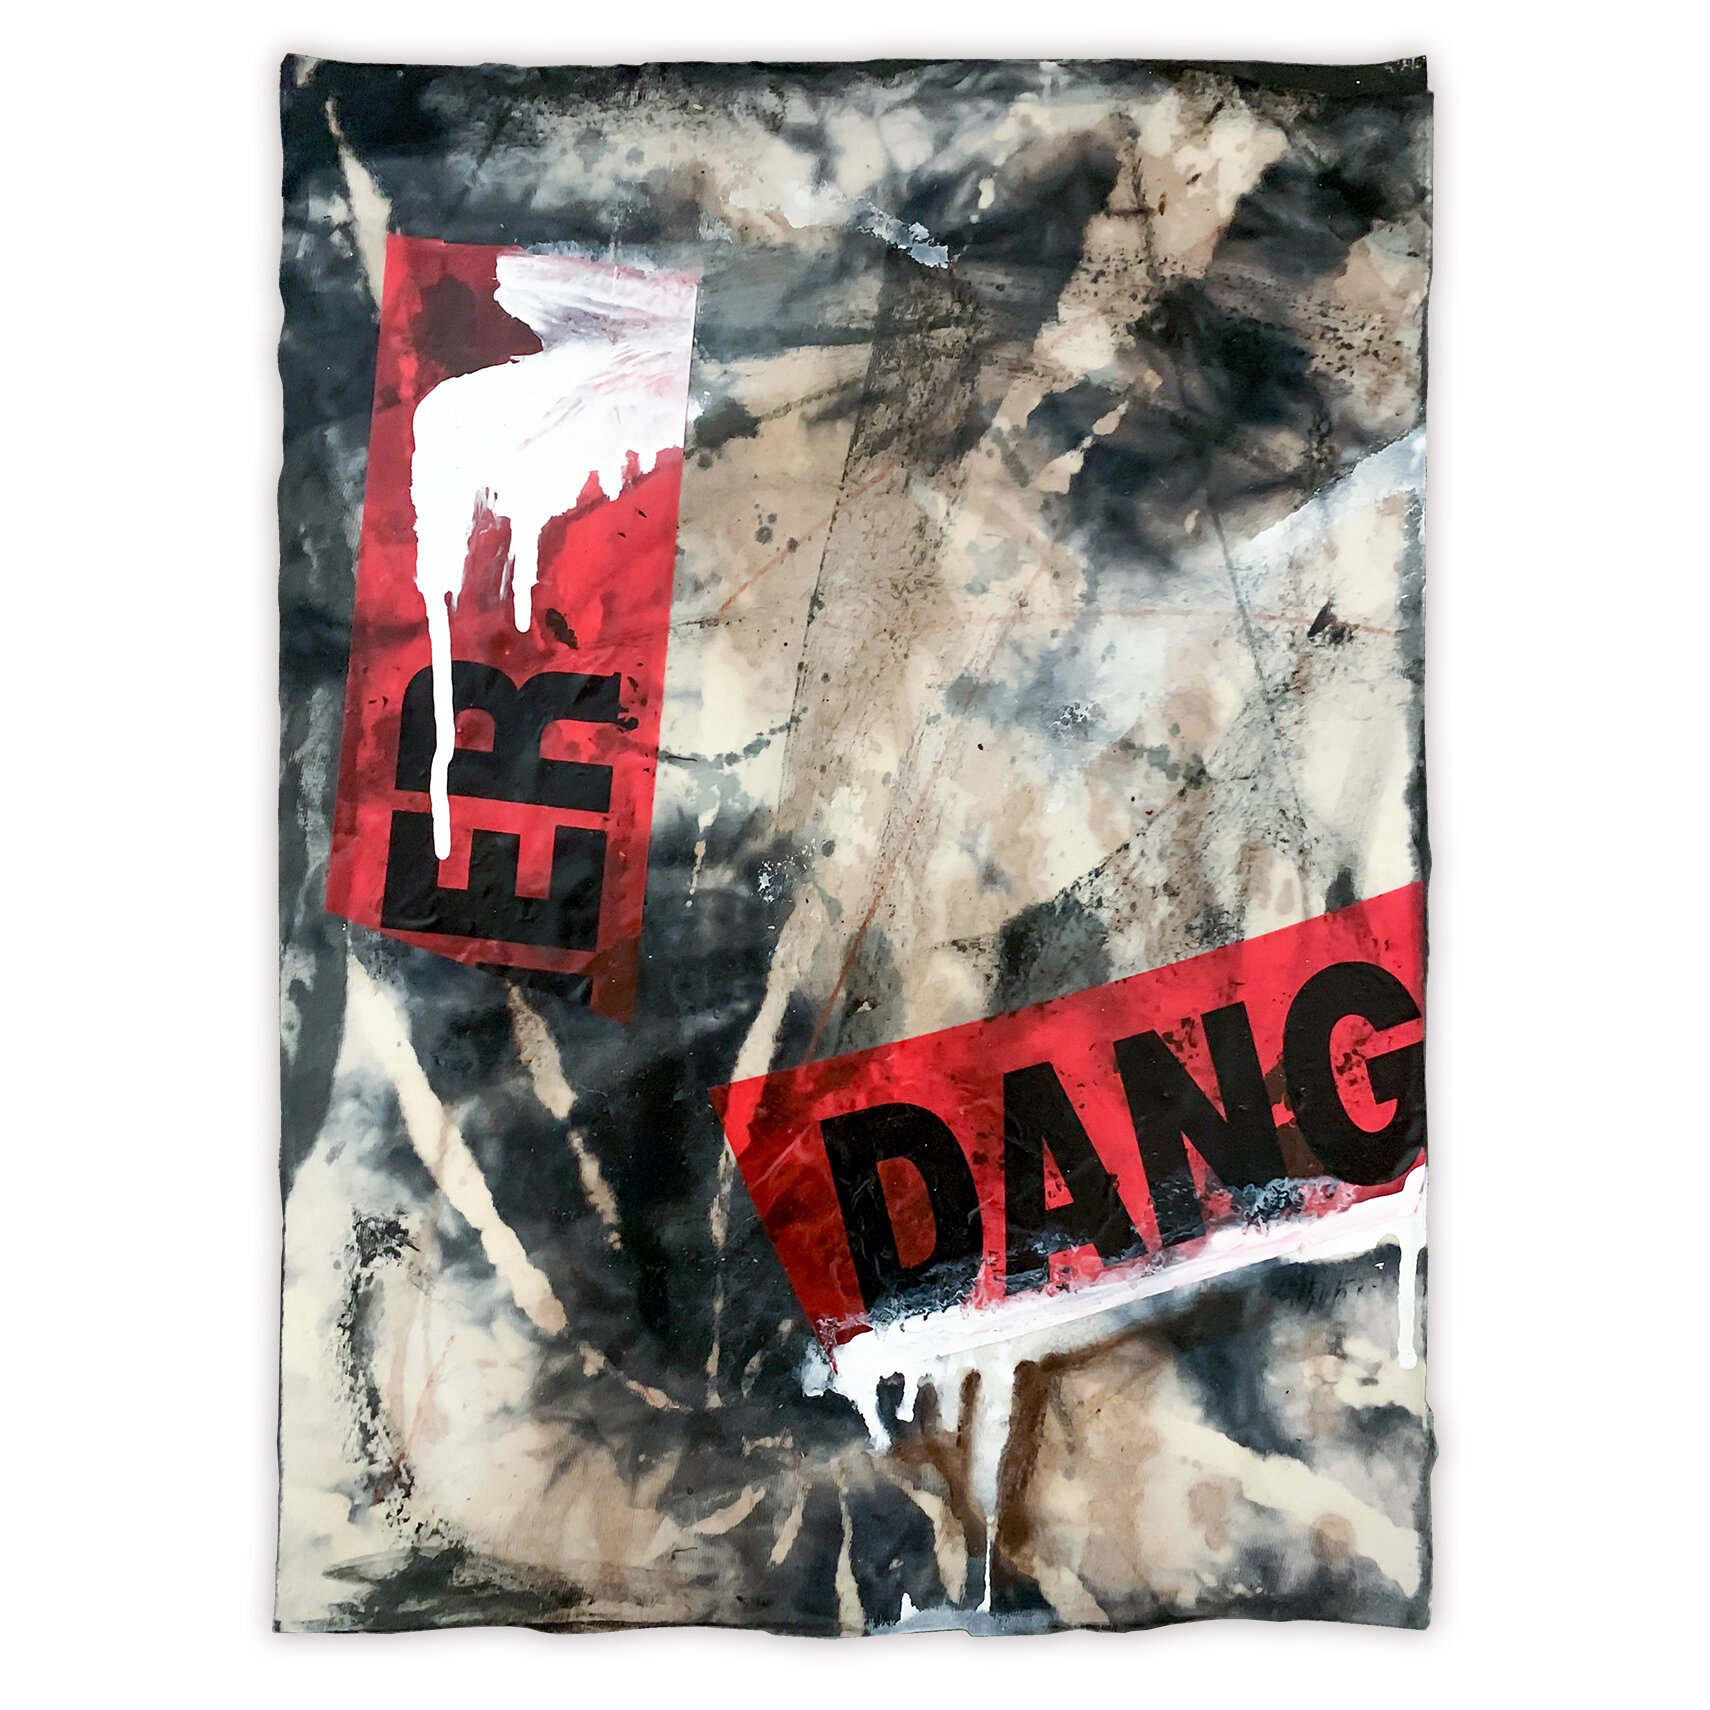 Alex Markwith, "DANG/ER DRIPS 1", 2019